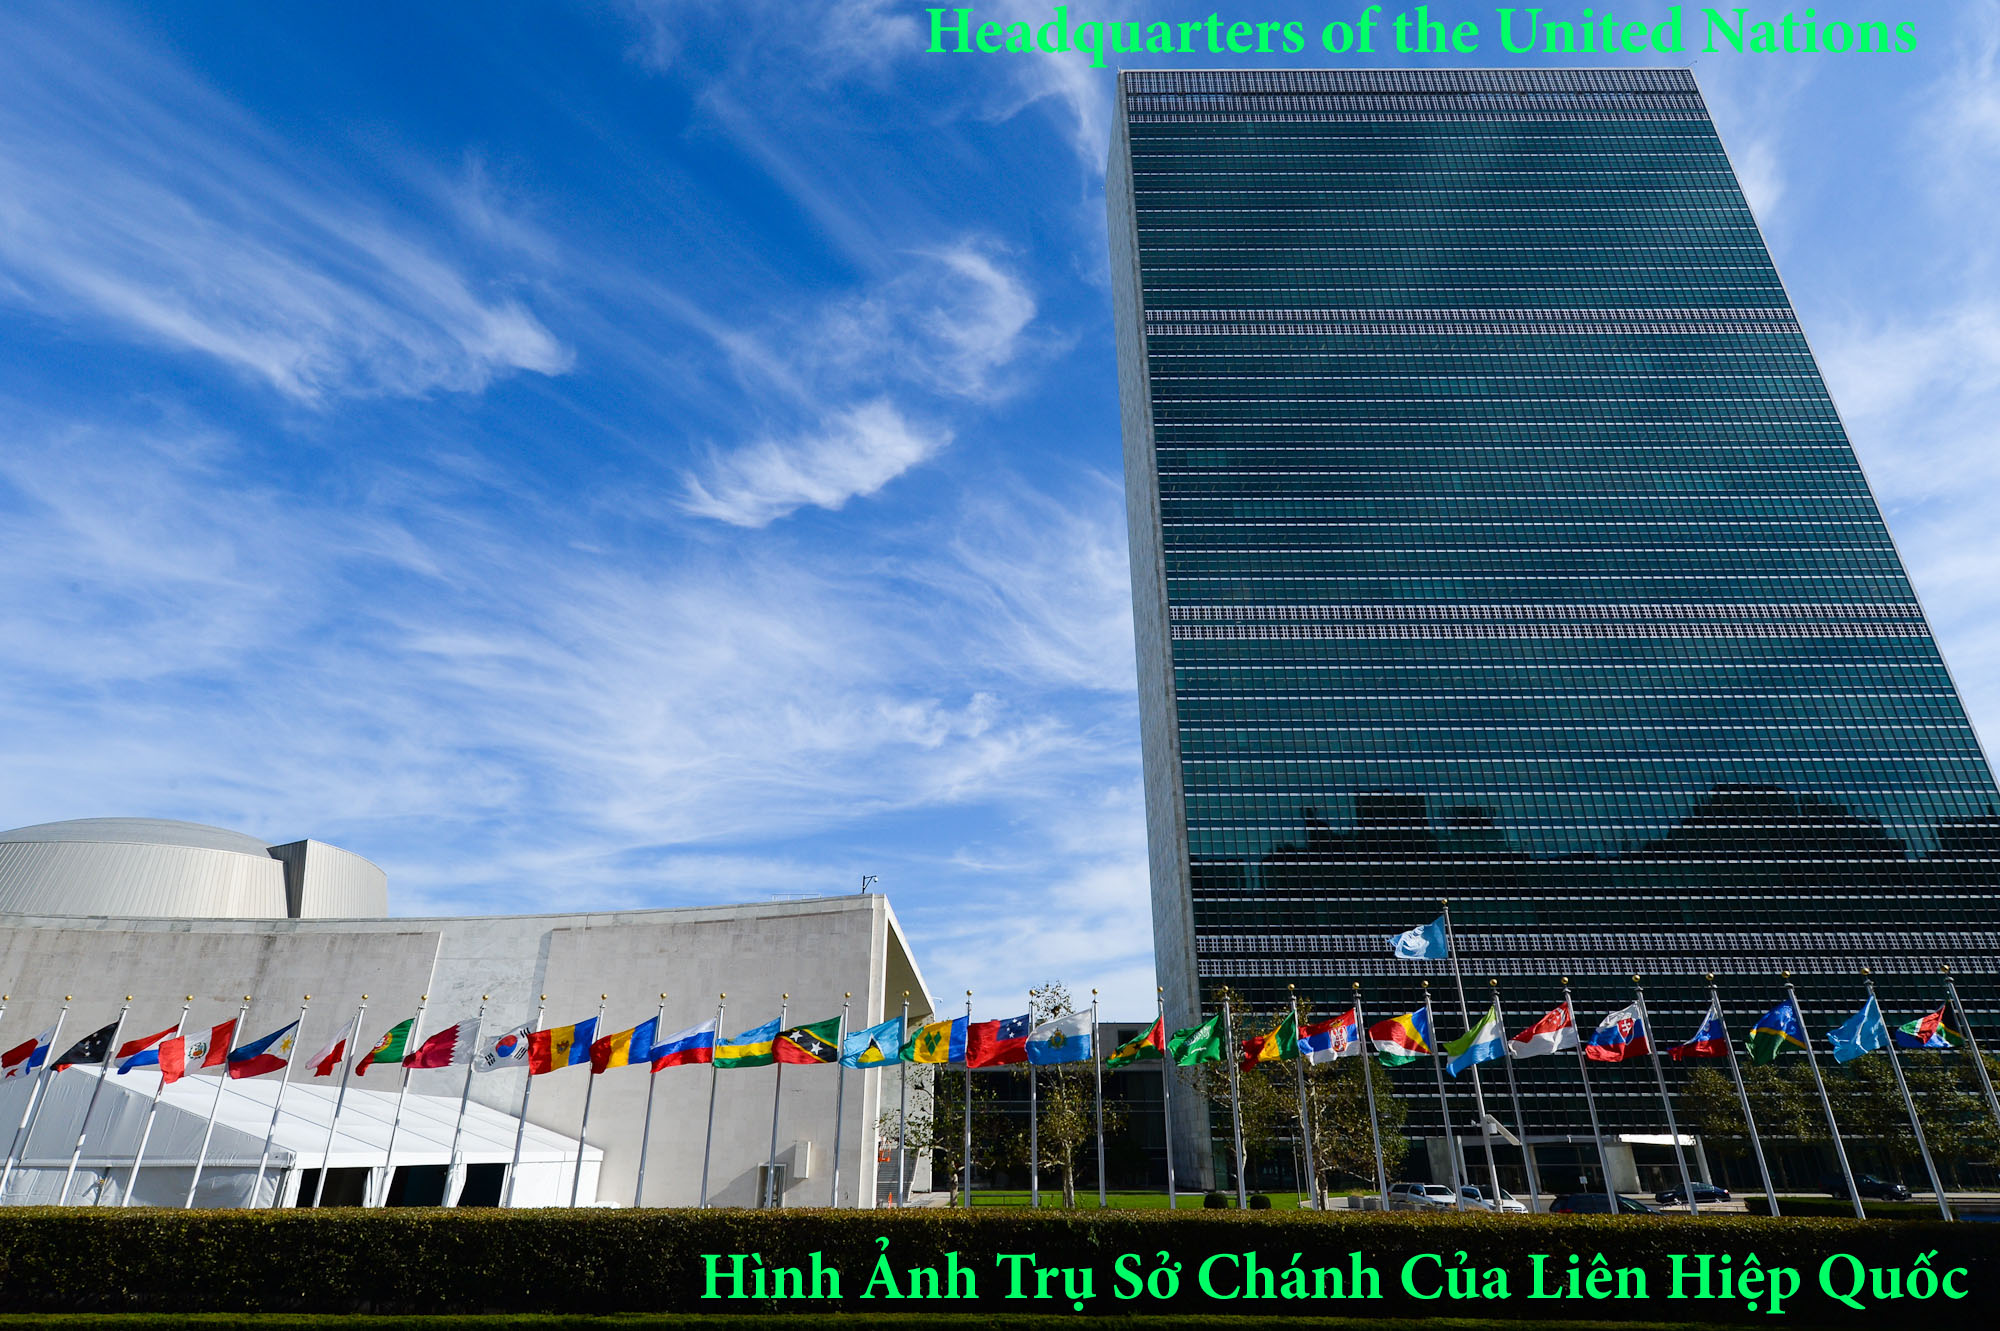 Headquarters-of-the-United-Nations.jpg